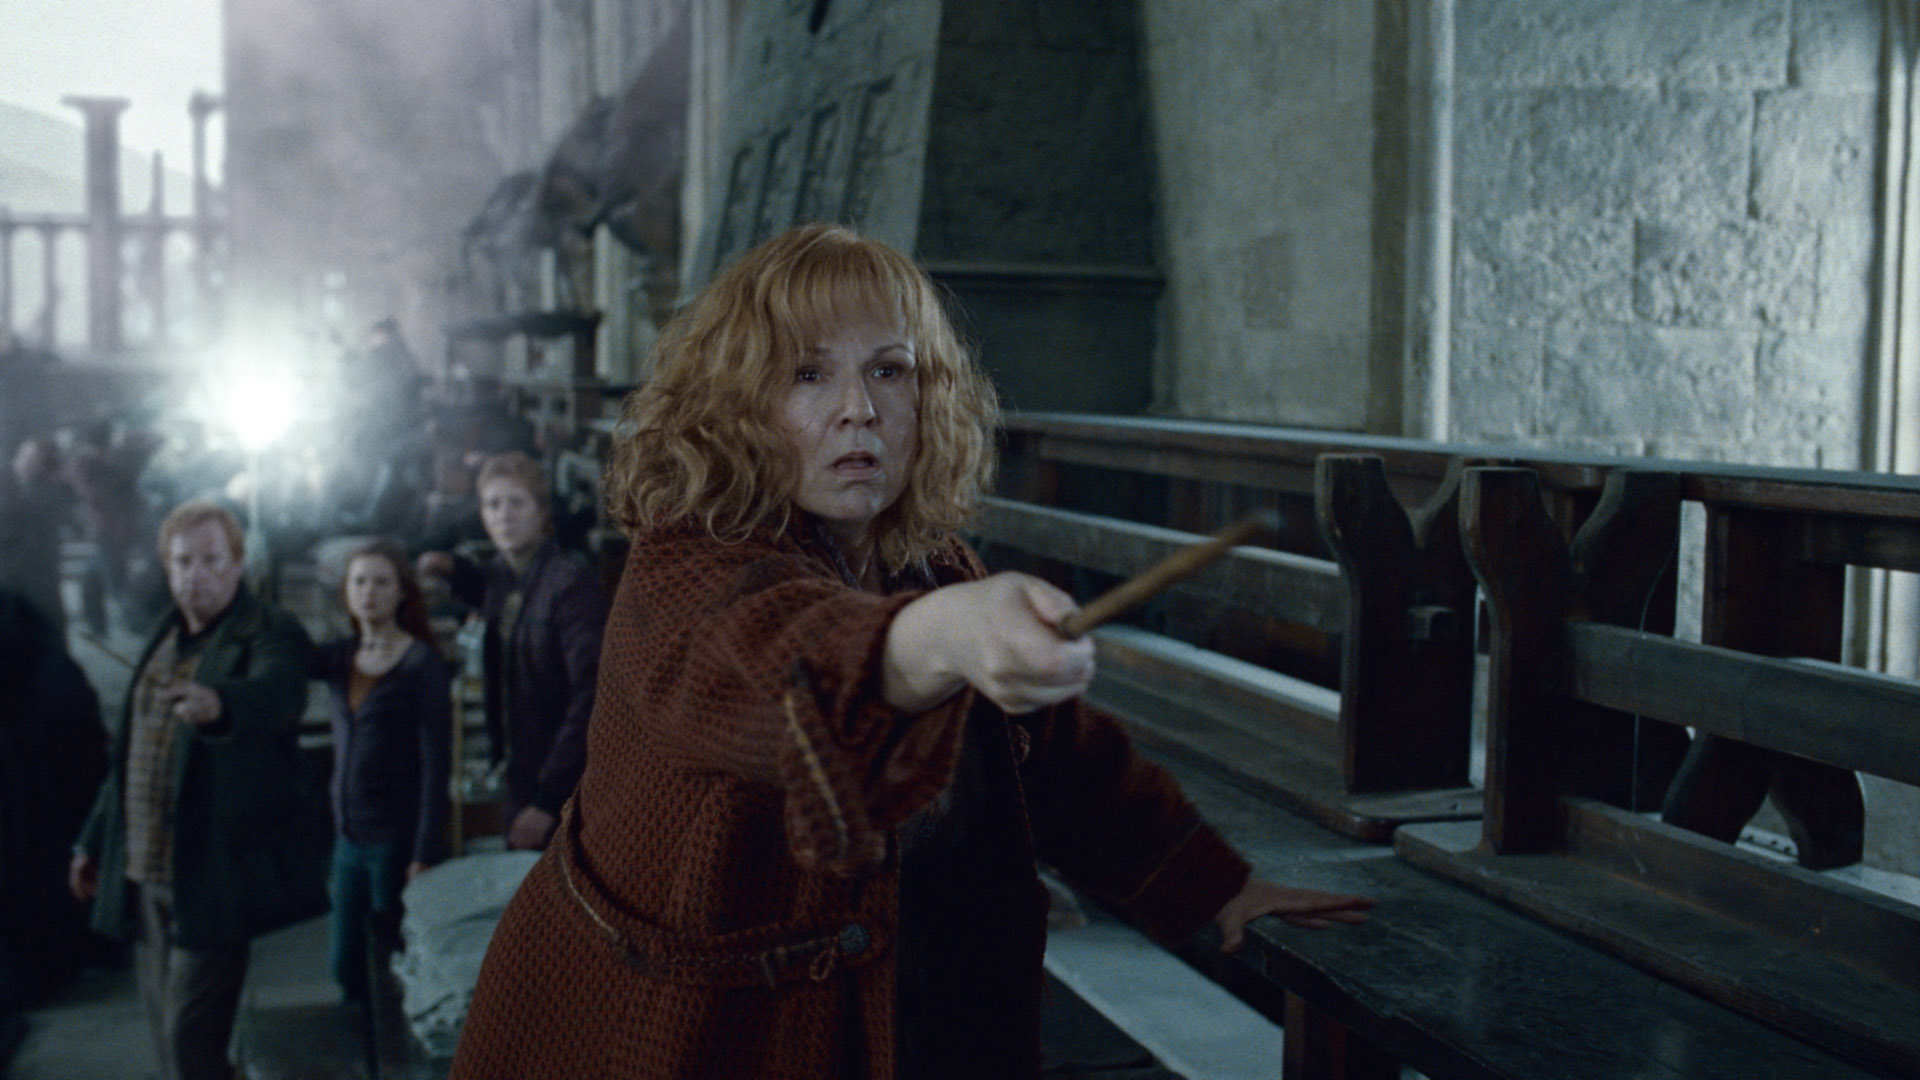 Molly Weasley in battle stance with wand ready in a scene from &quot;Harry Potter and the Deathly Hallows: Part 2&quot;